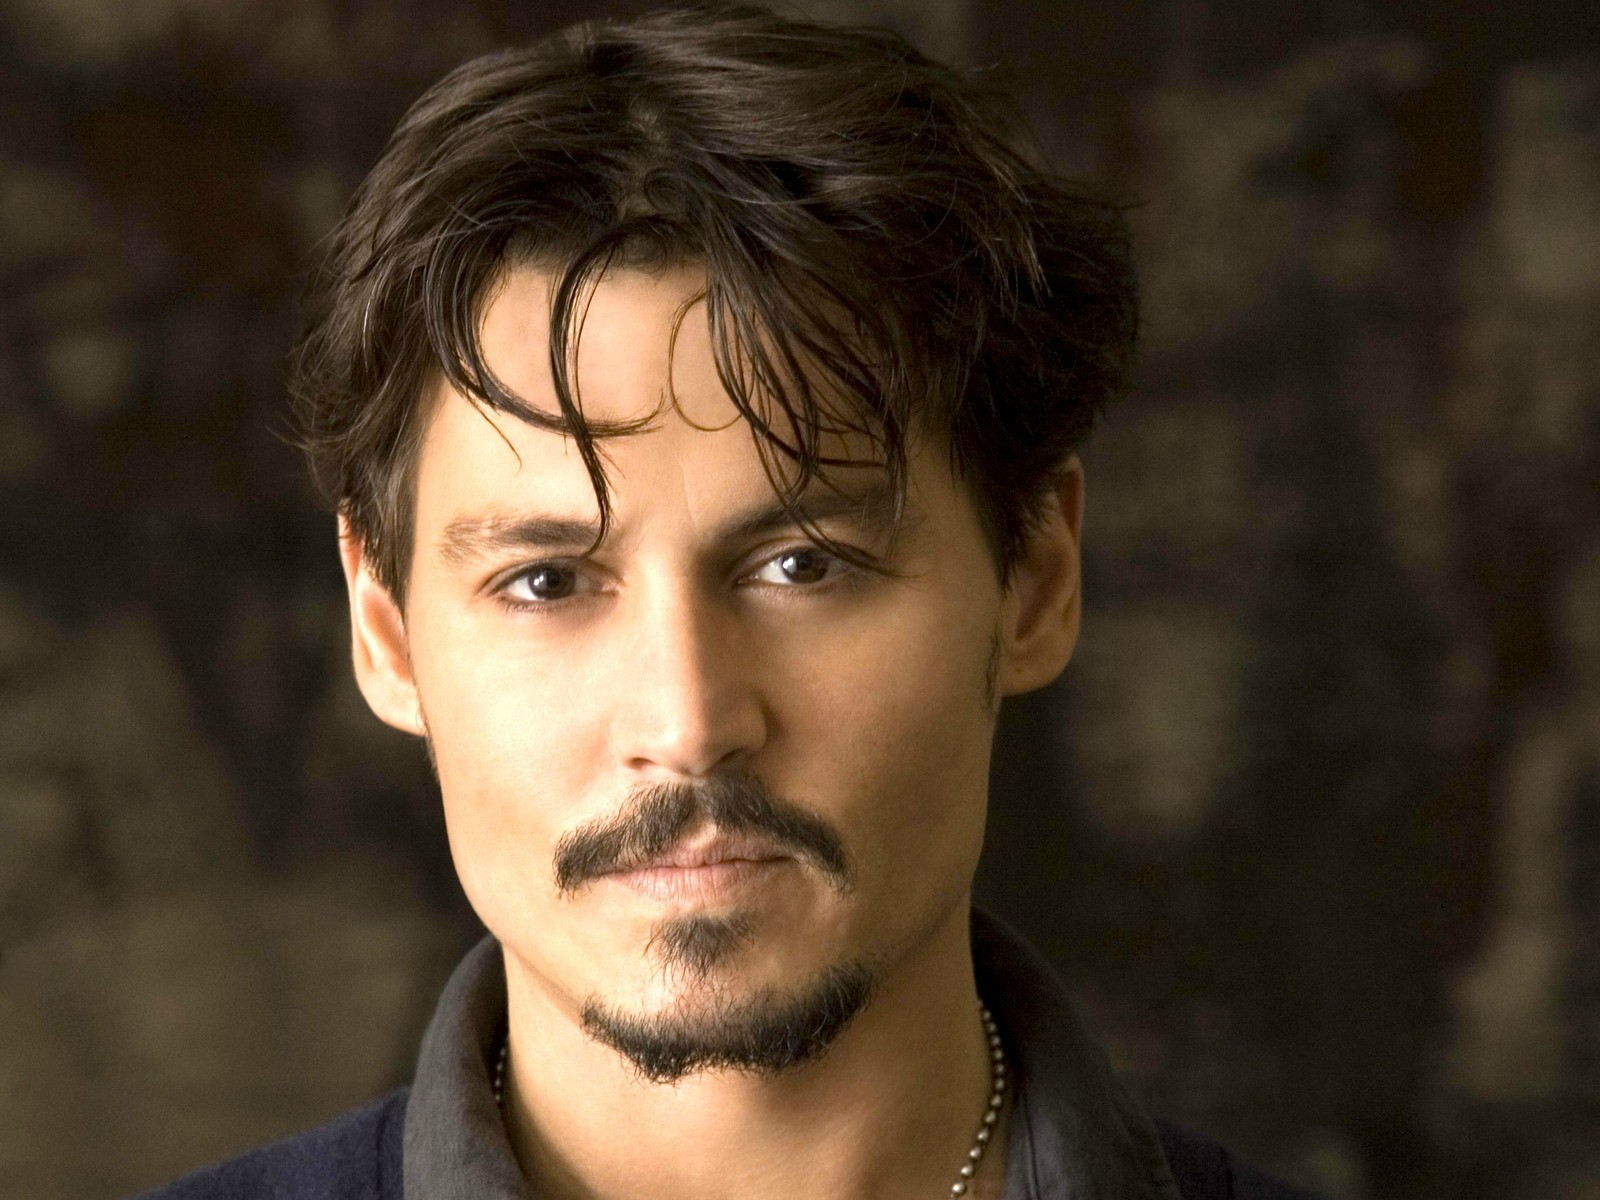 Time lapse of Johnny Depp ageing.